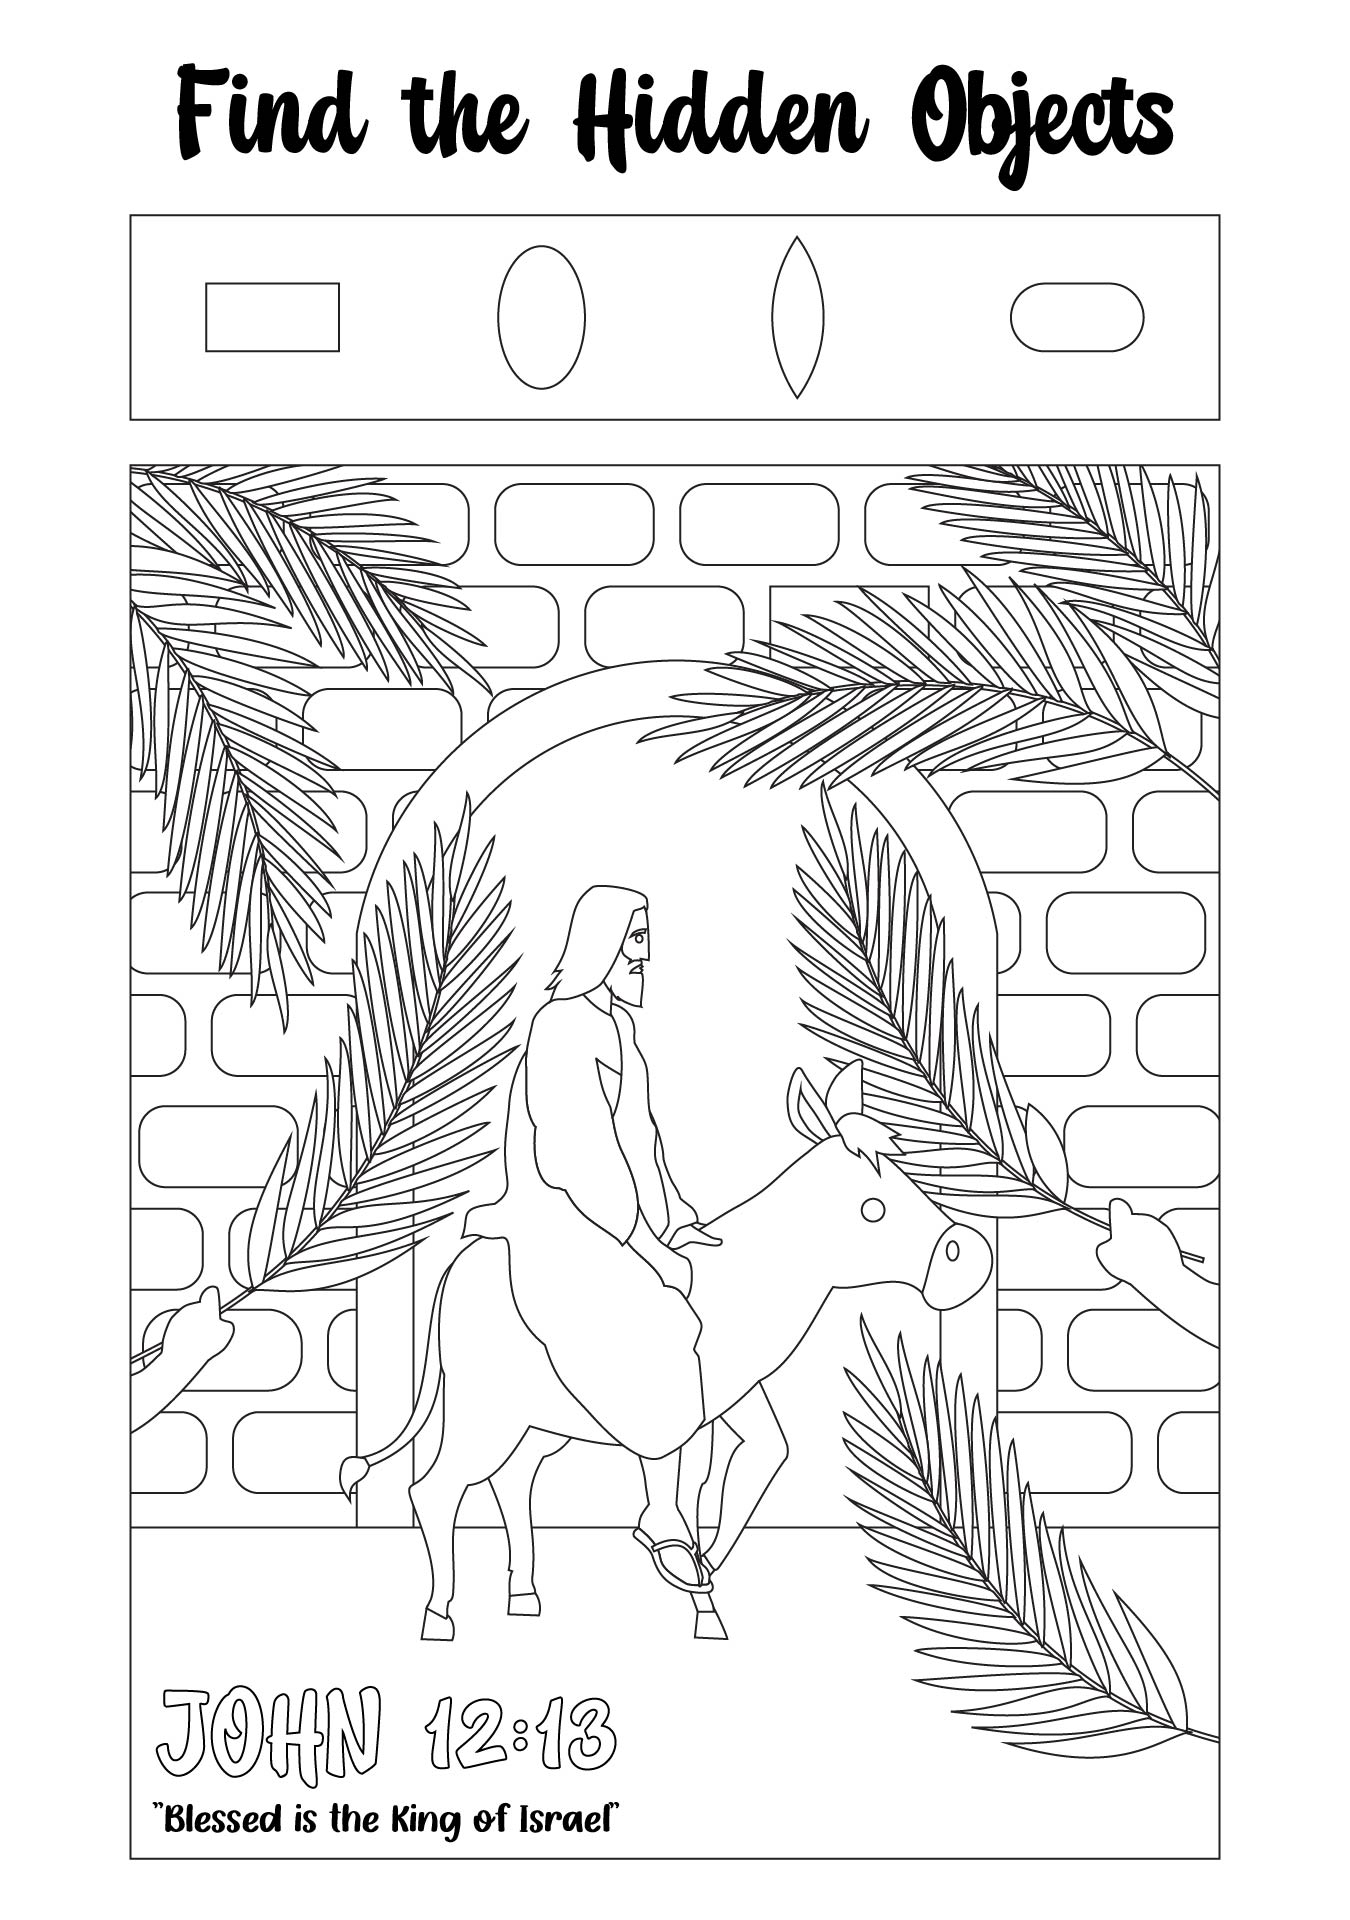 Bible Printables Hidden Objects Puzzle